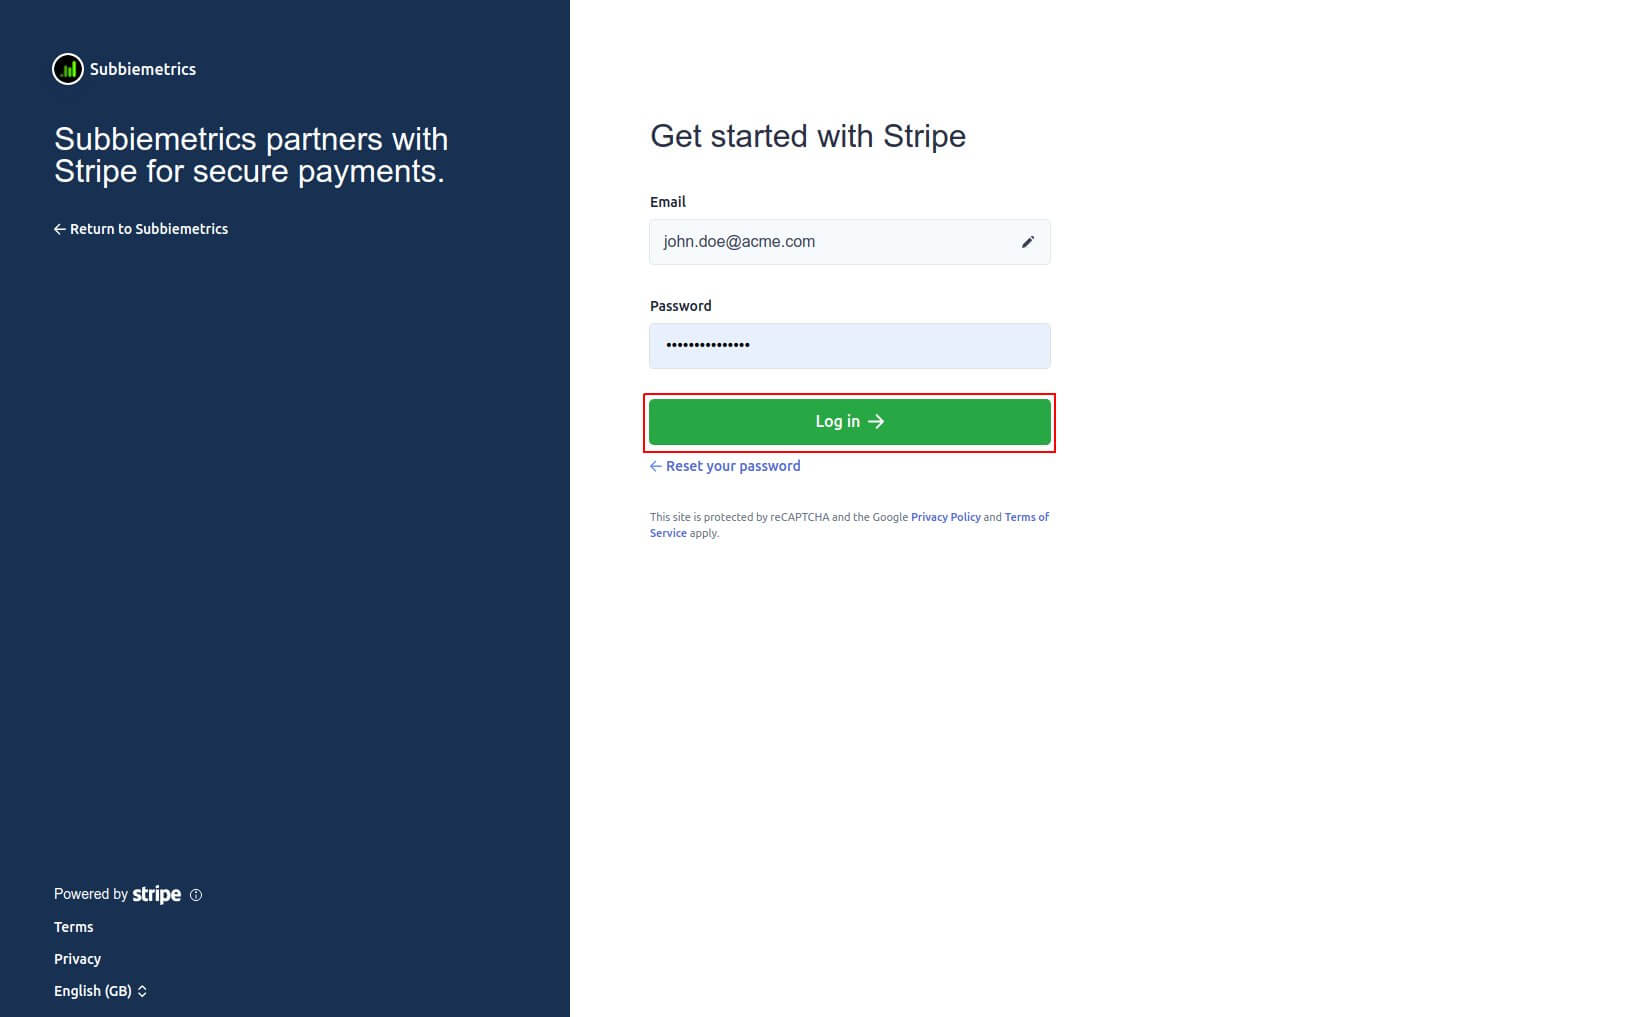 Put in your Stripe password to log into your account